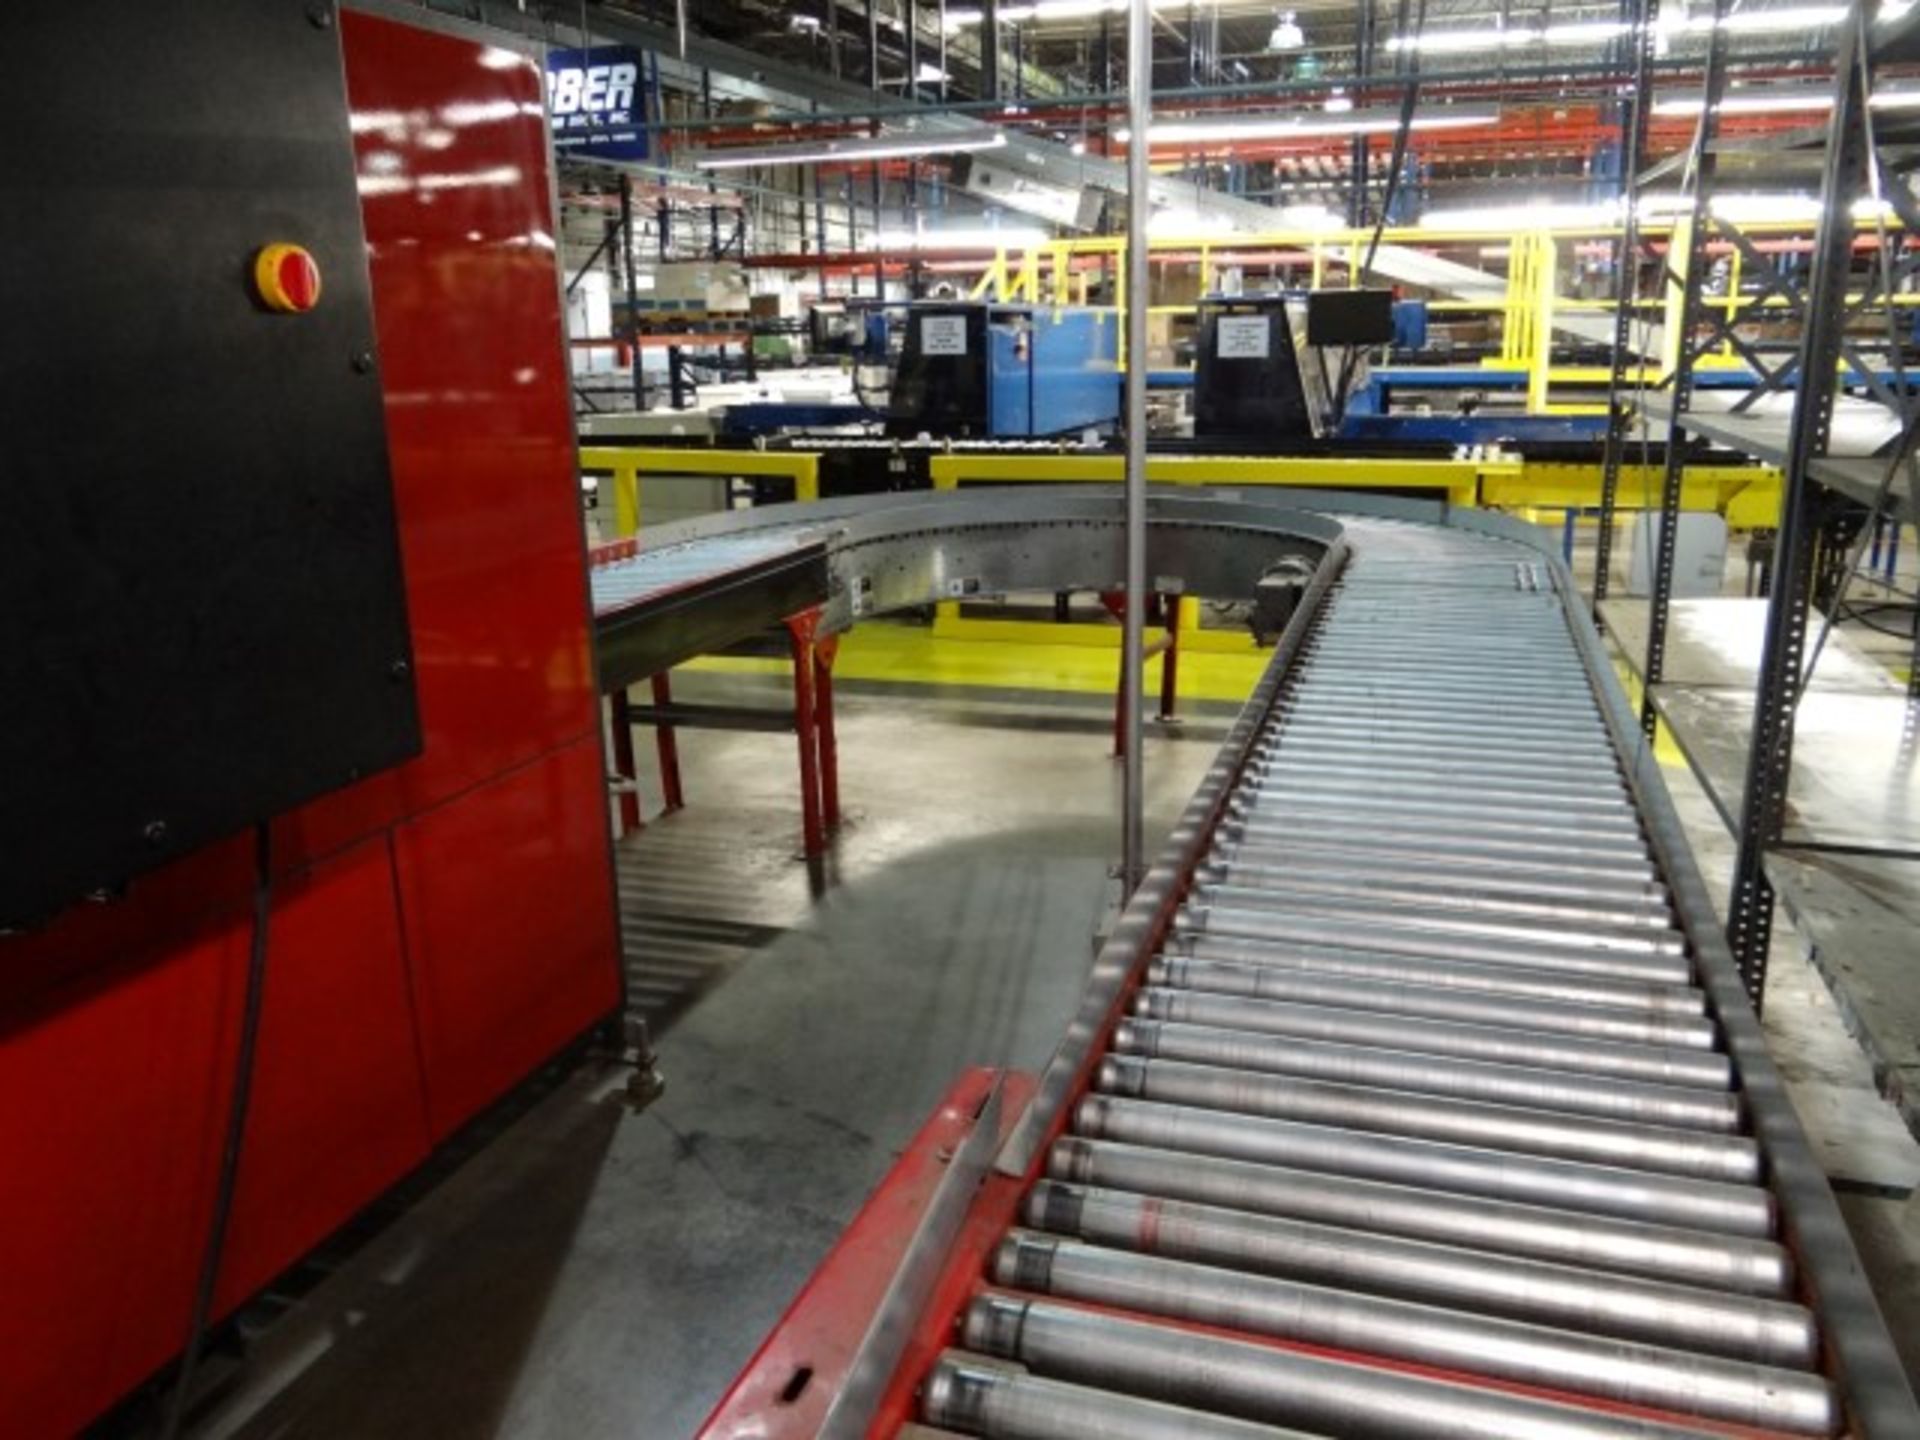 Tech King Cigarette Pick to Light System with 6 Pick Stations, Conveyors, Flow Racks, Box Tram and - Image 41 of 57